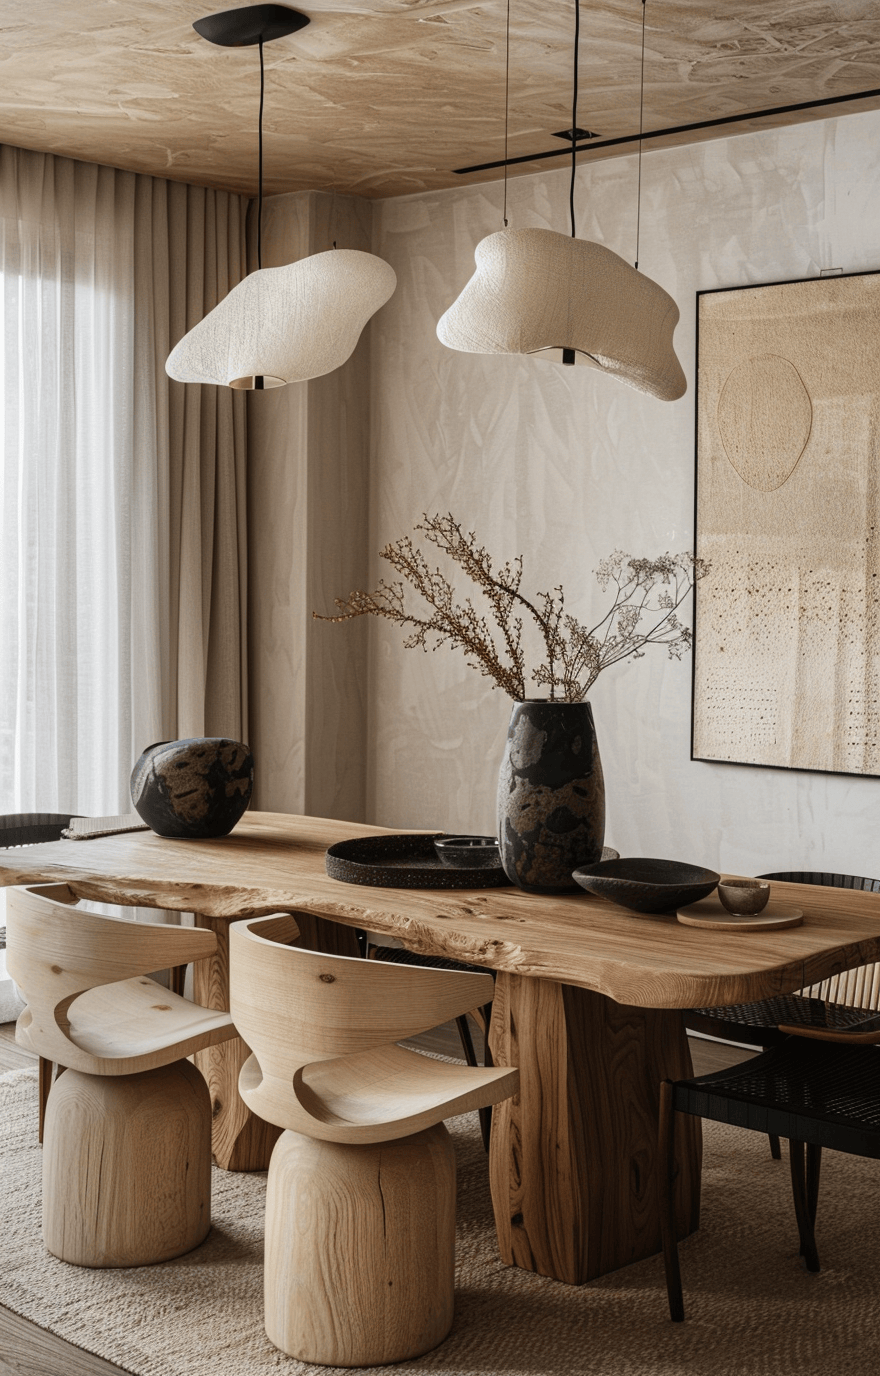 Low-hanging artwork in a Japandi dining room setting